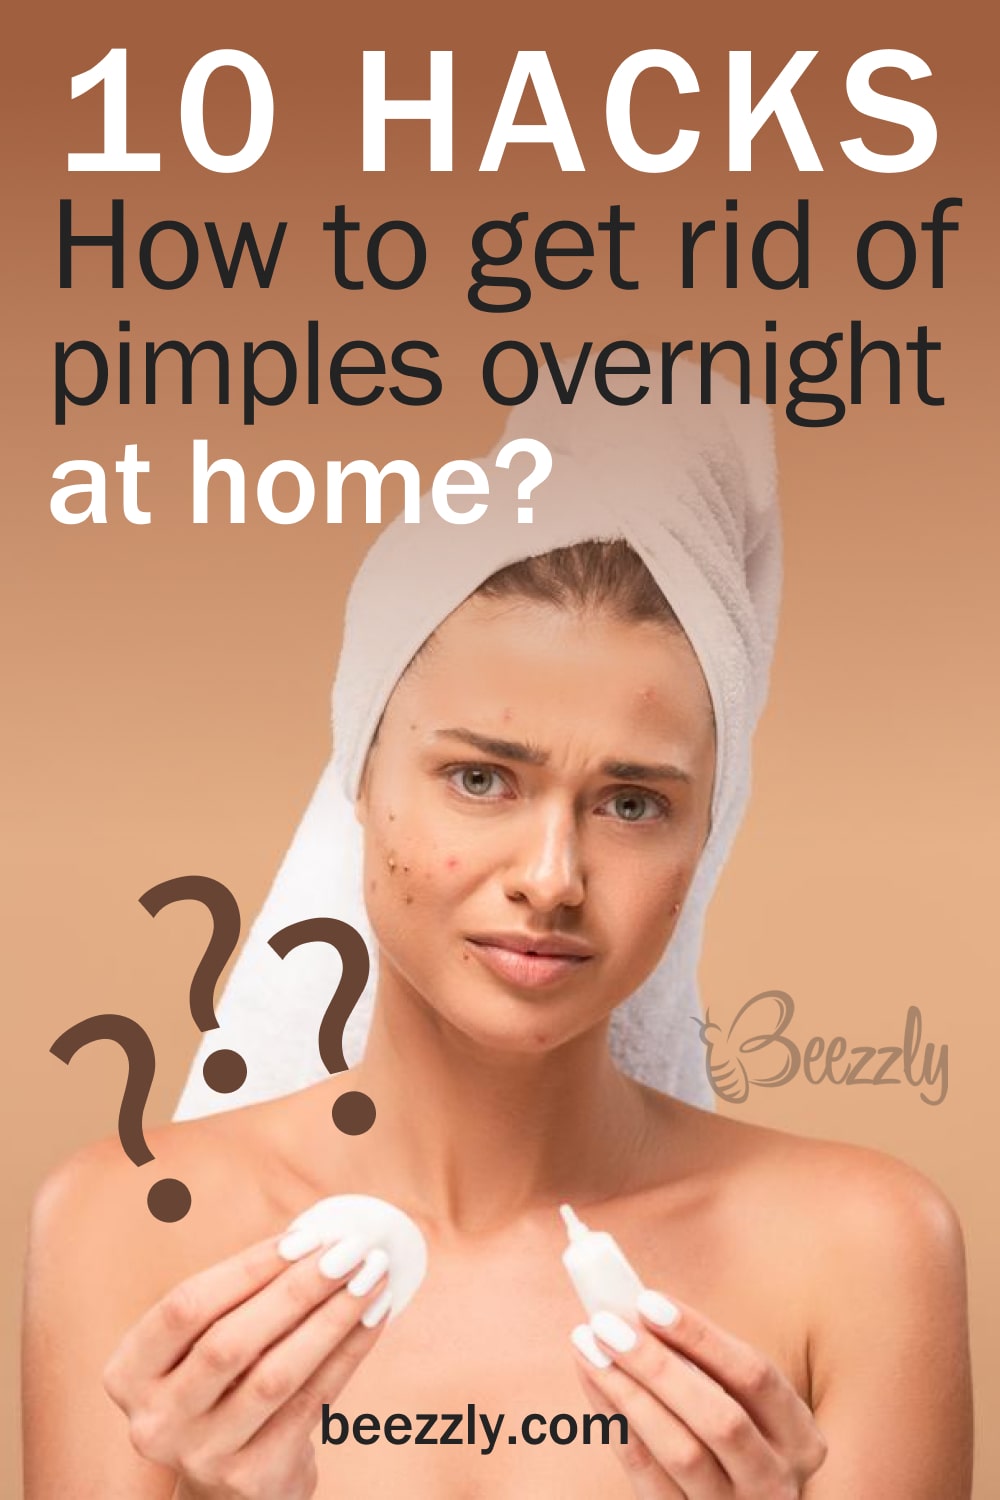 How to Remove Pimples at Home